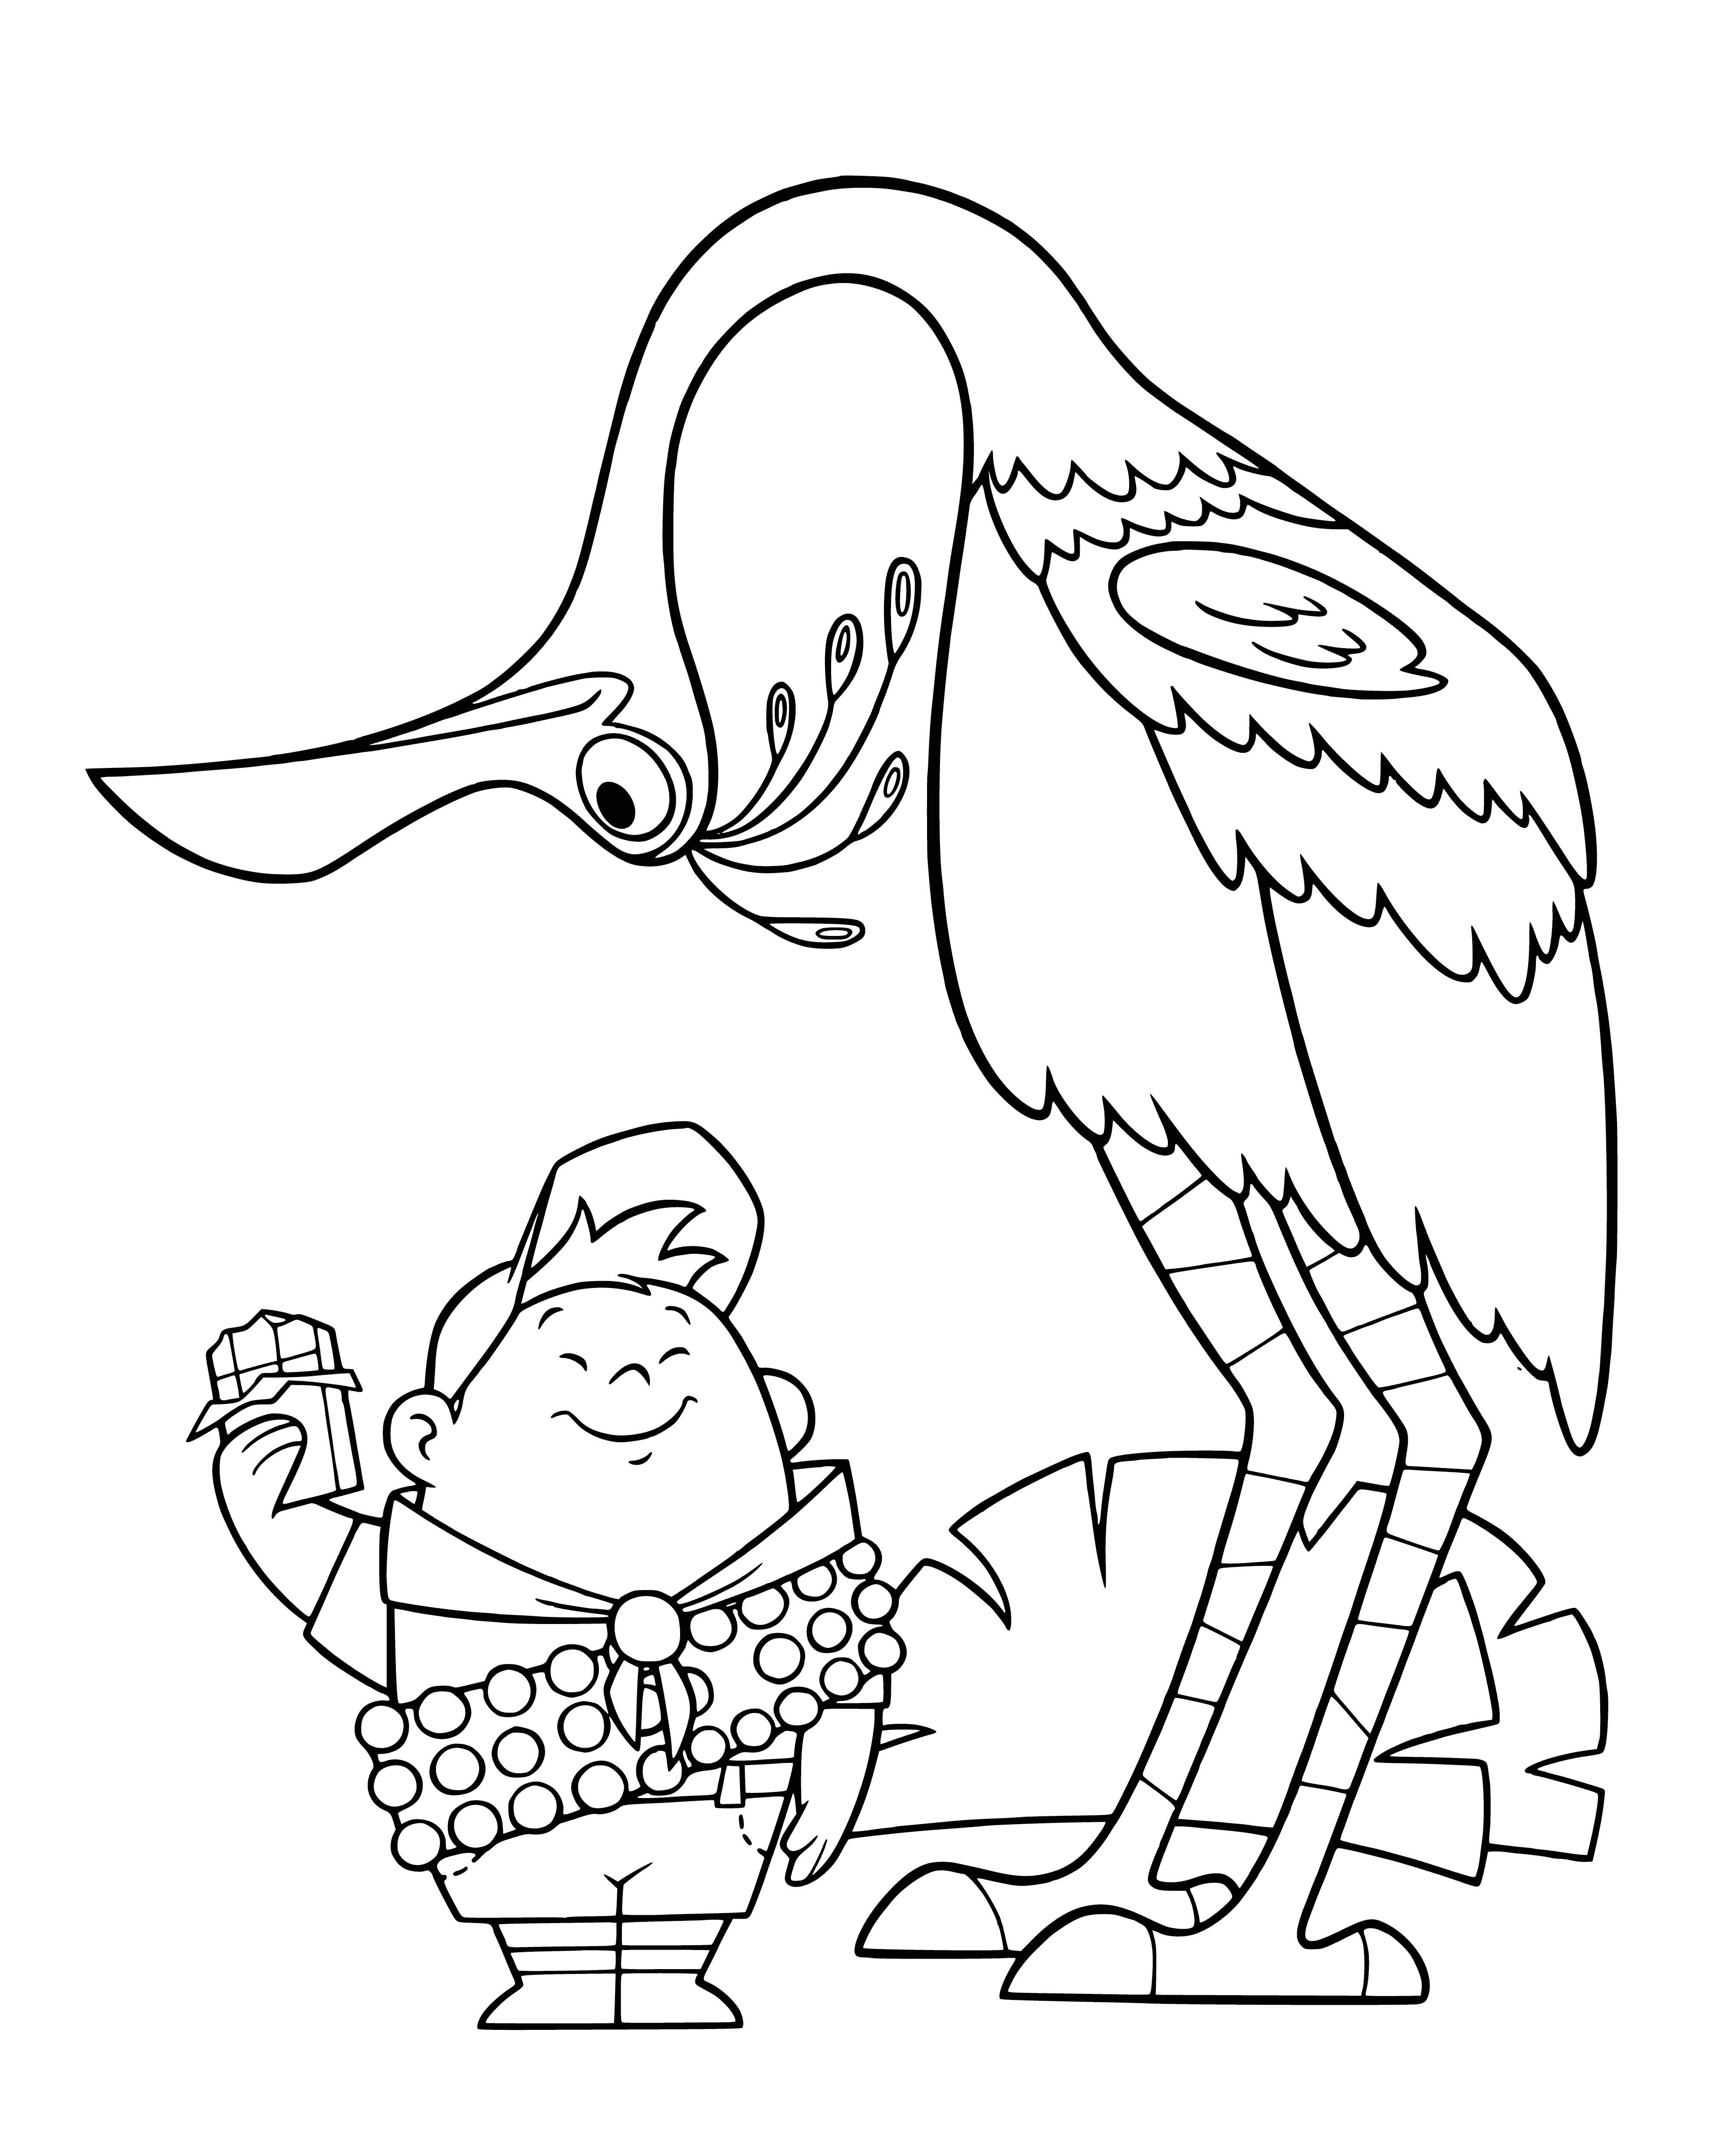 Russell with chocolate coloring page